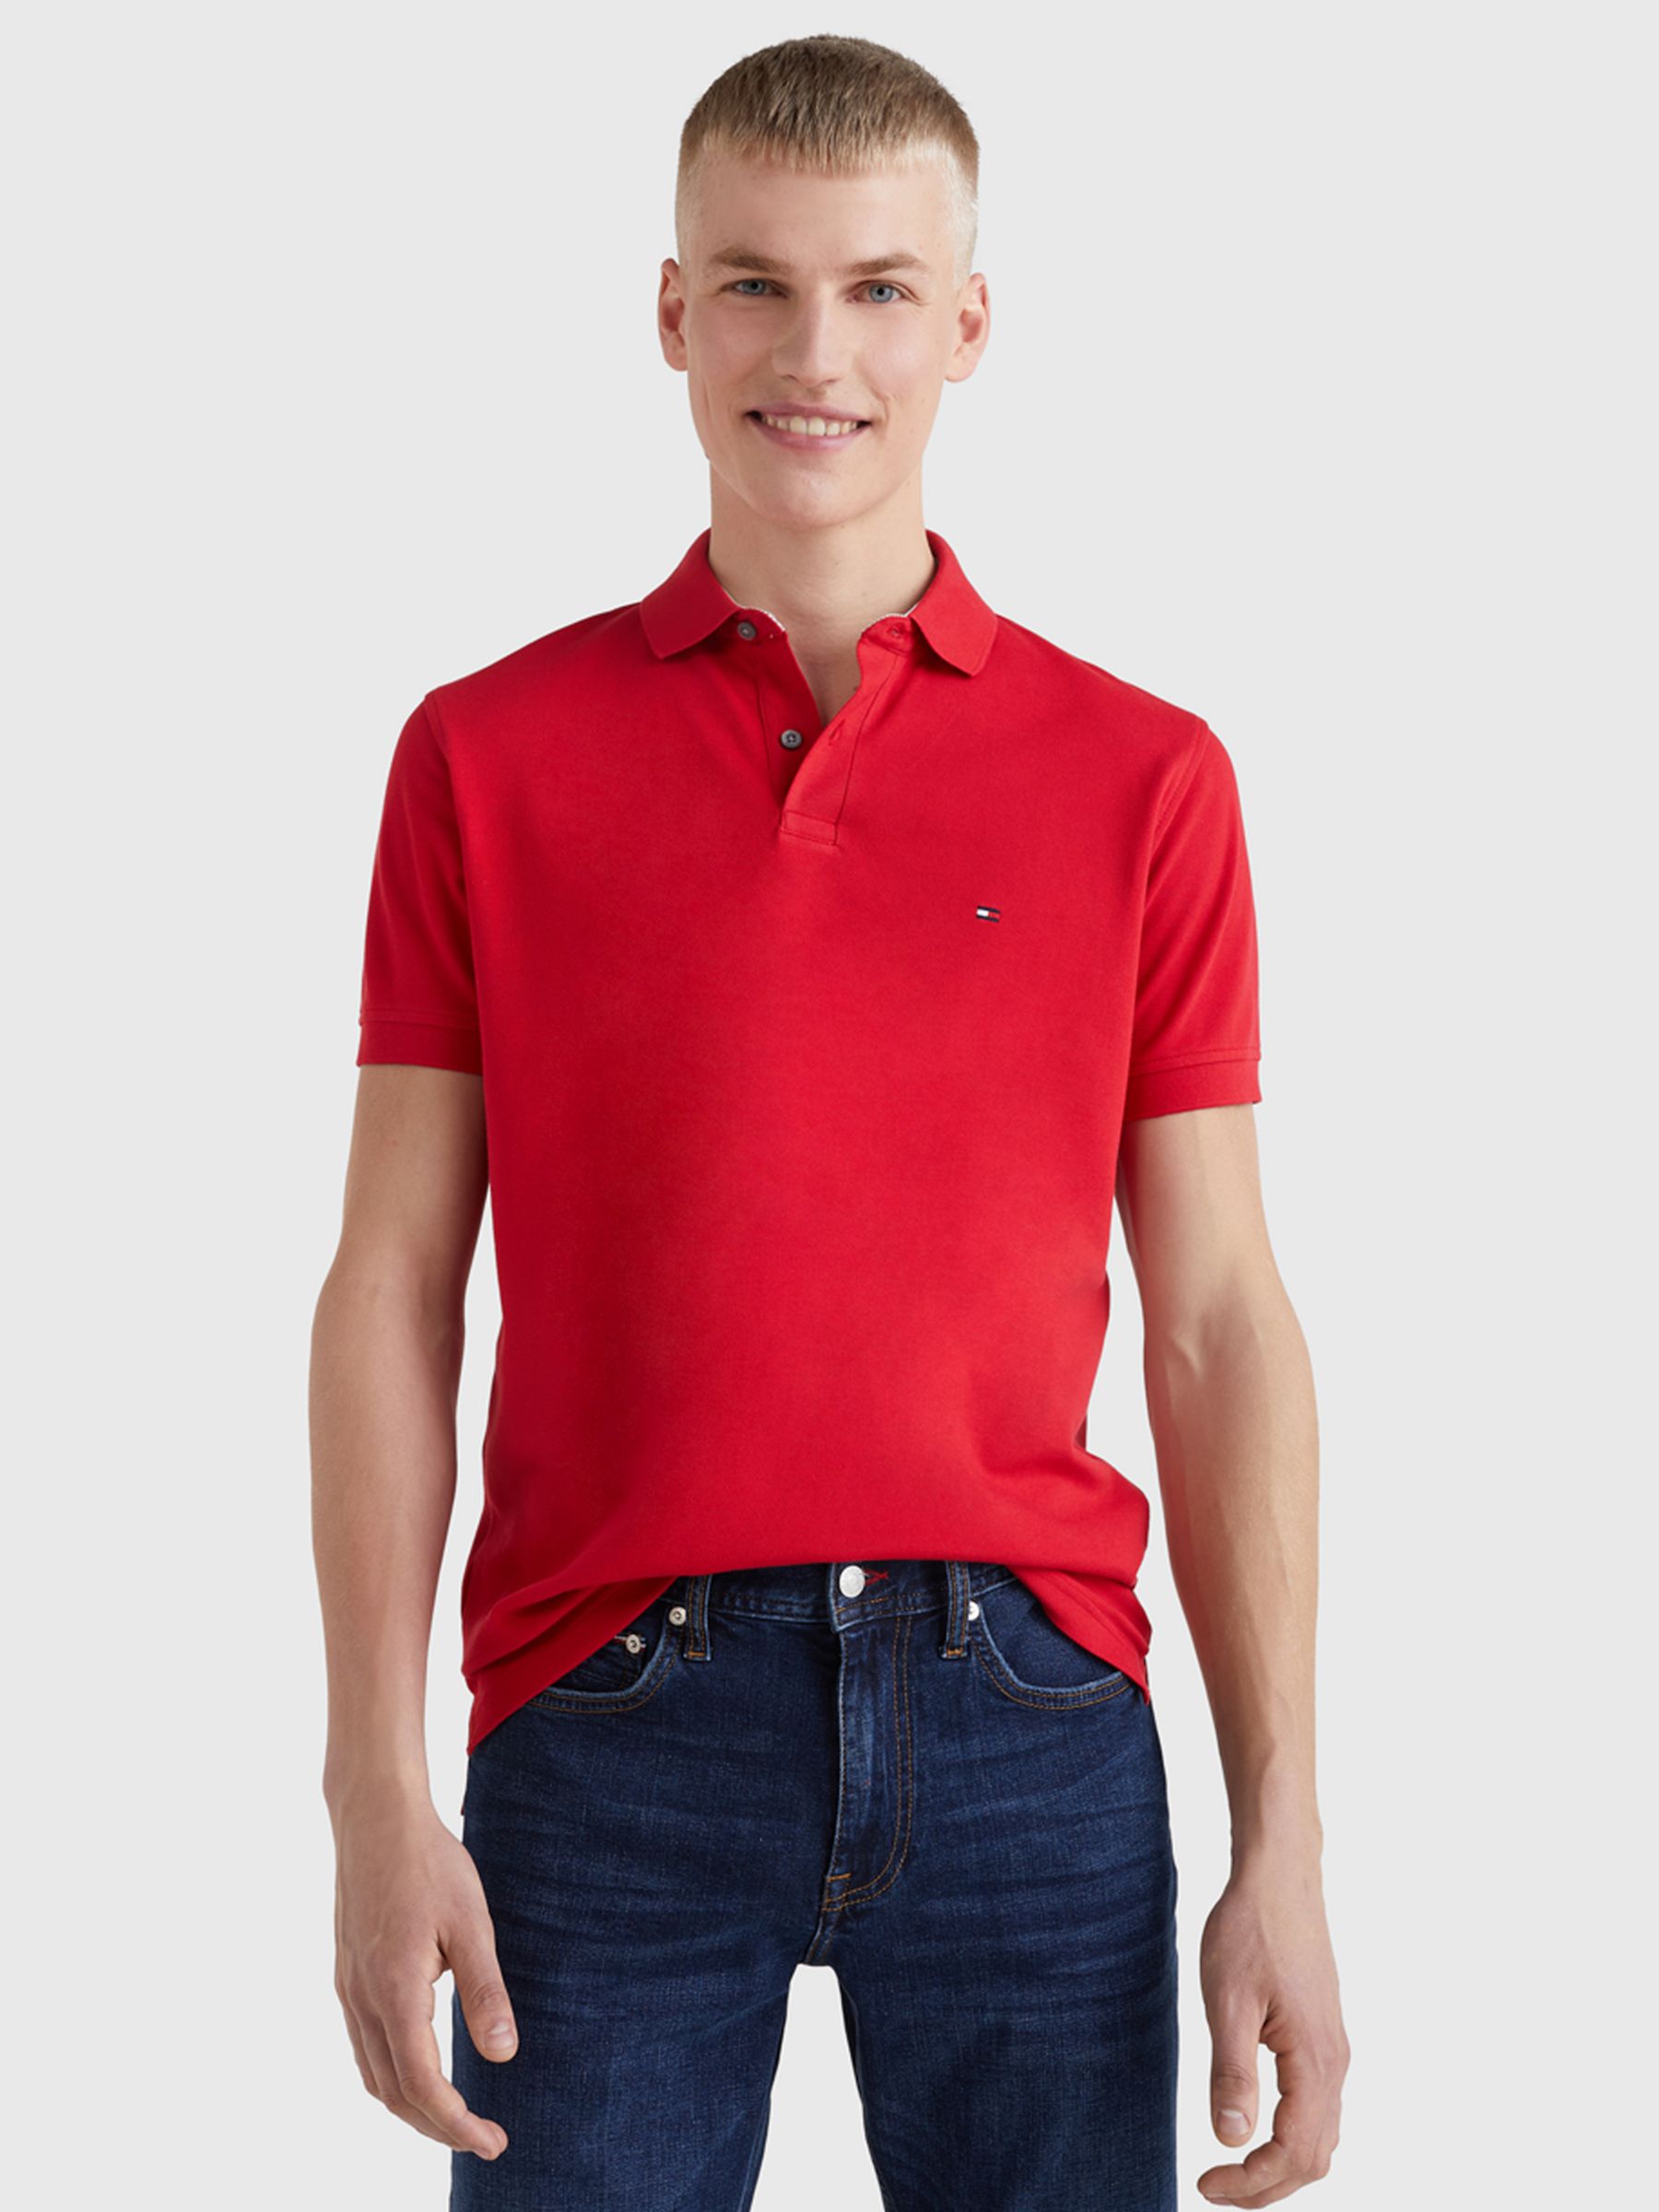 Tommy Hilfiger 1985 Classic Short Sleeve Polo Shirt, Primary Red, L